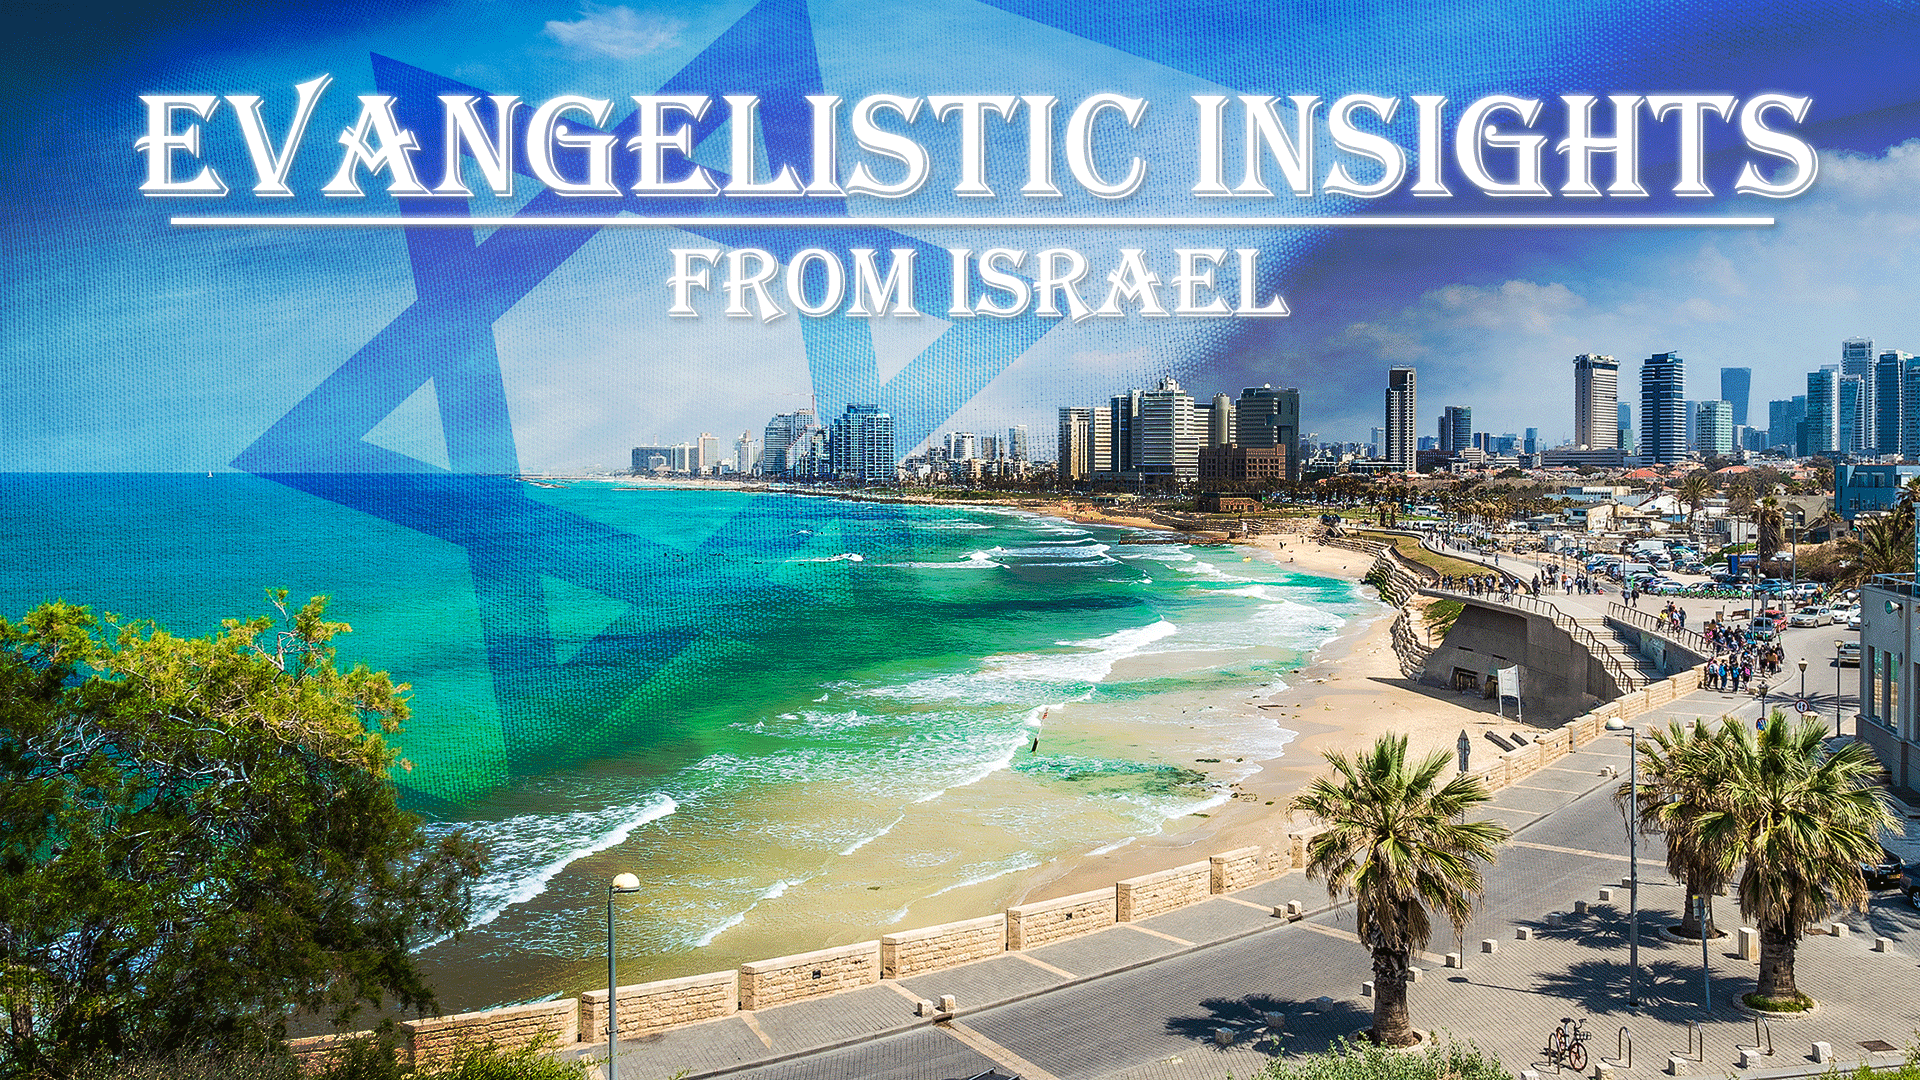 Evangelistic Insights from Israel with Avi Mizrachi - Thumb